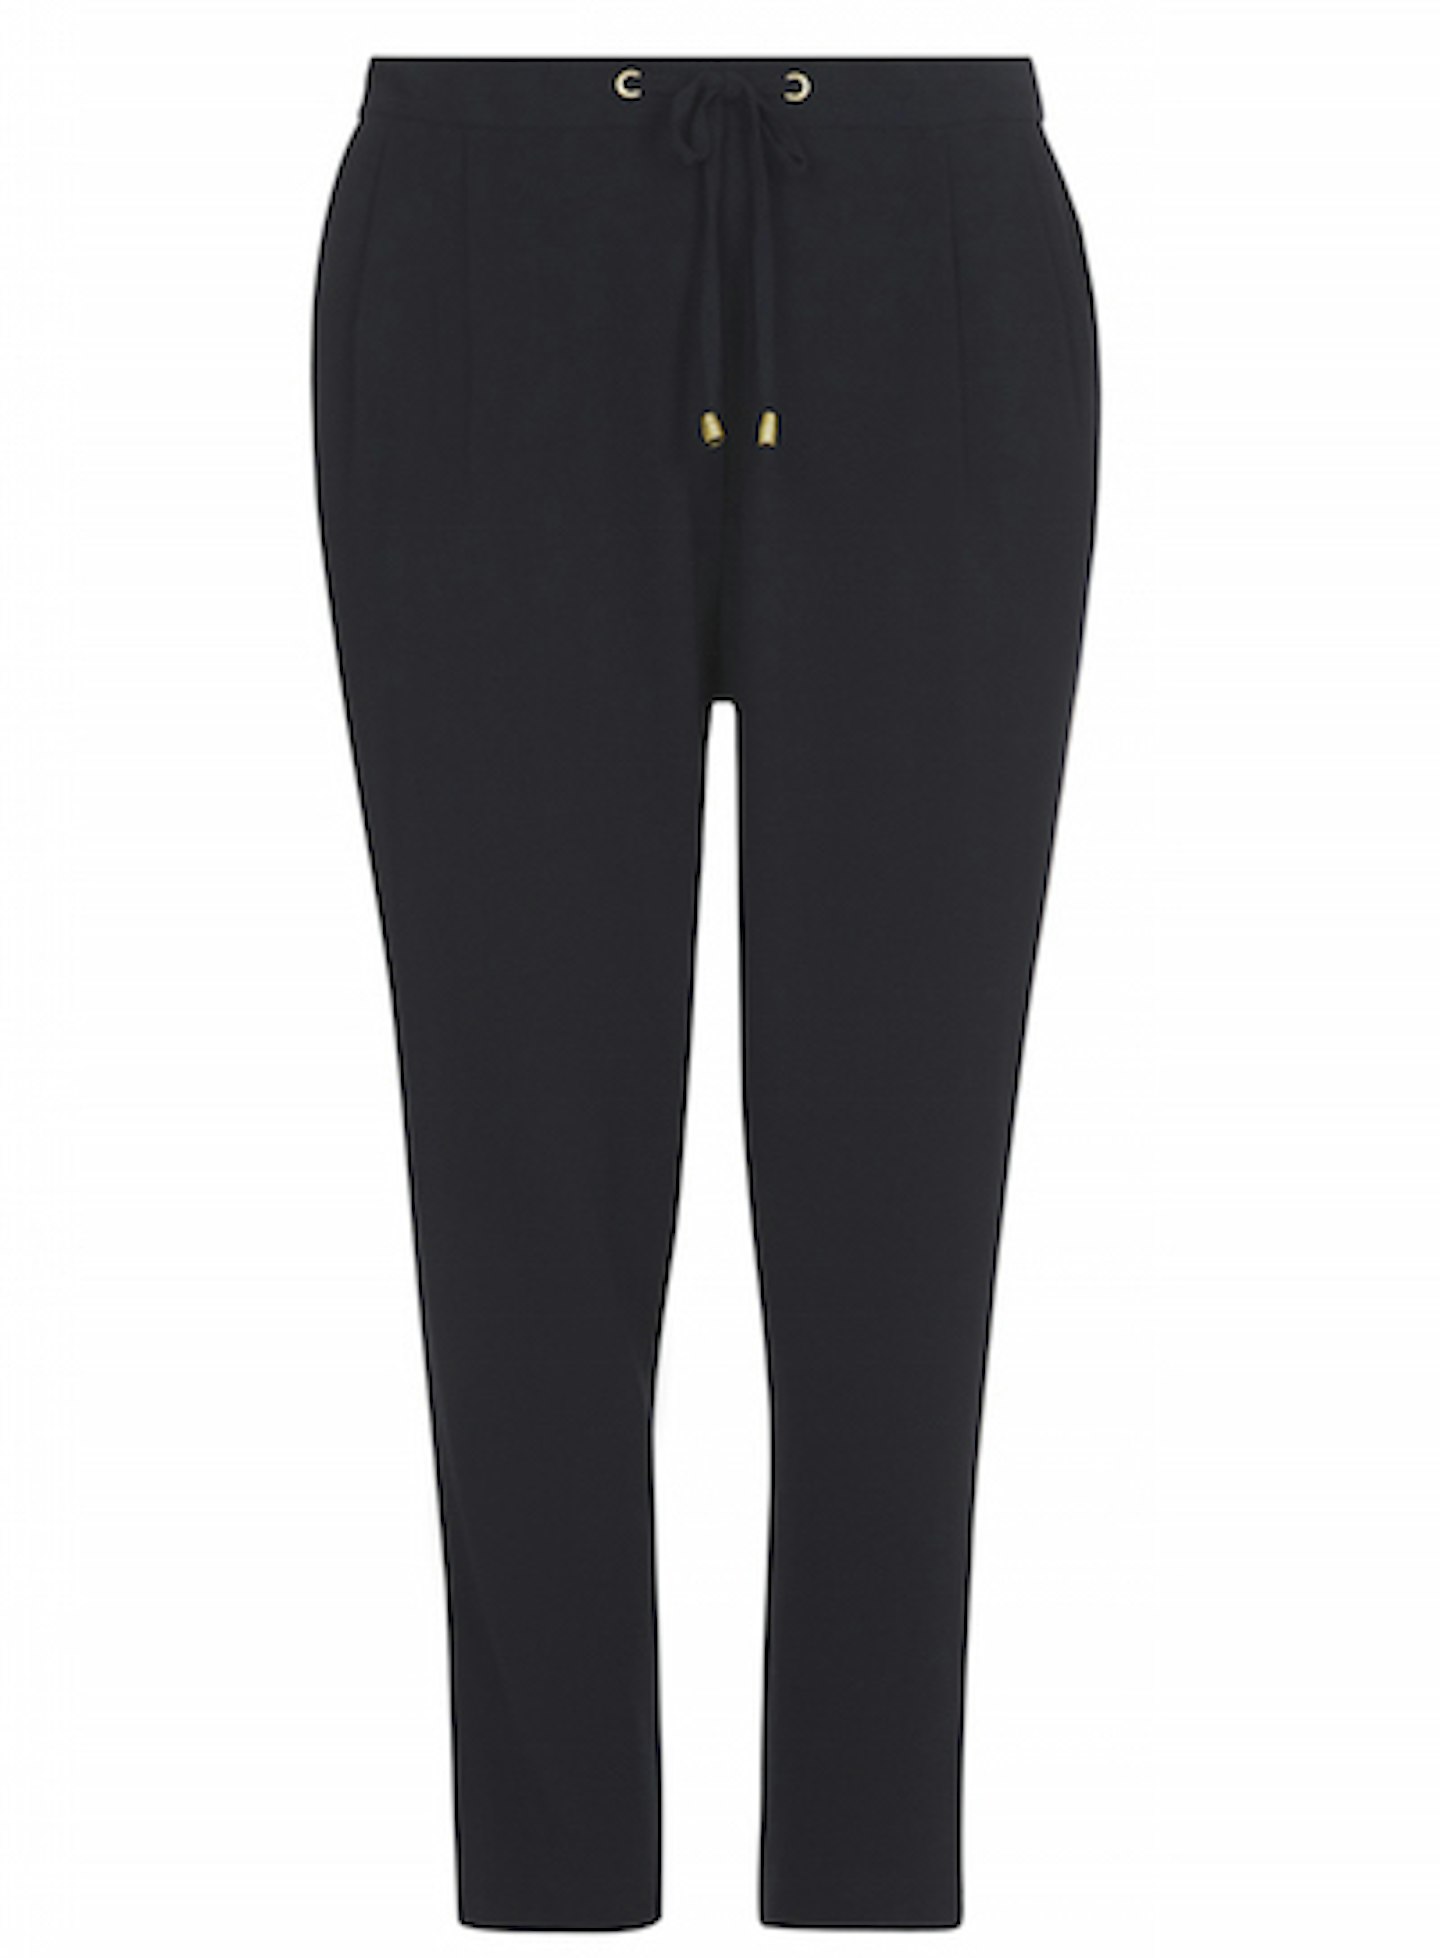 Black tapered trousers £30